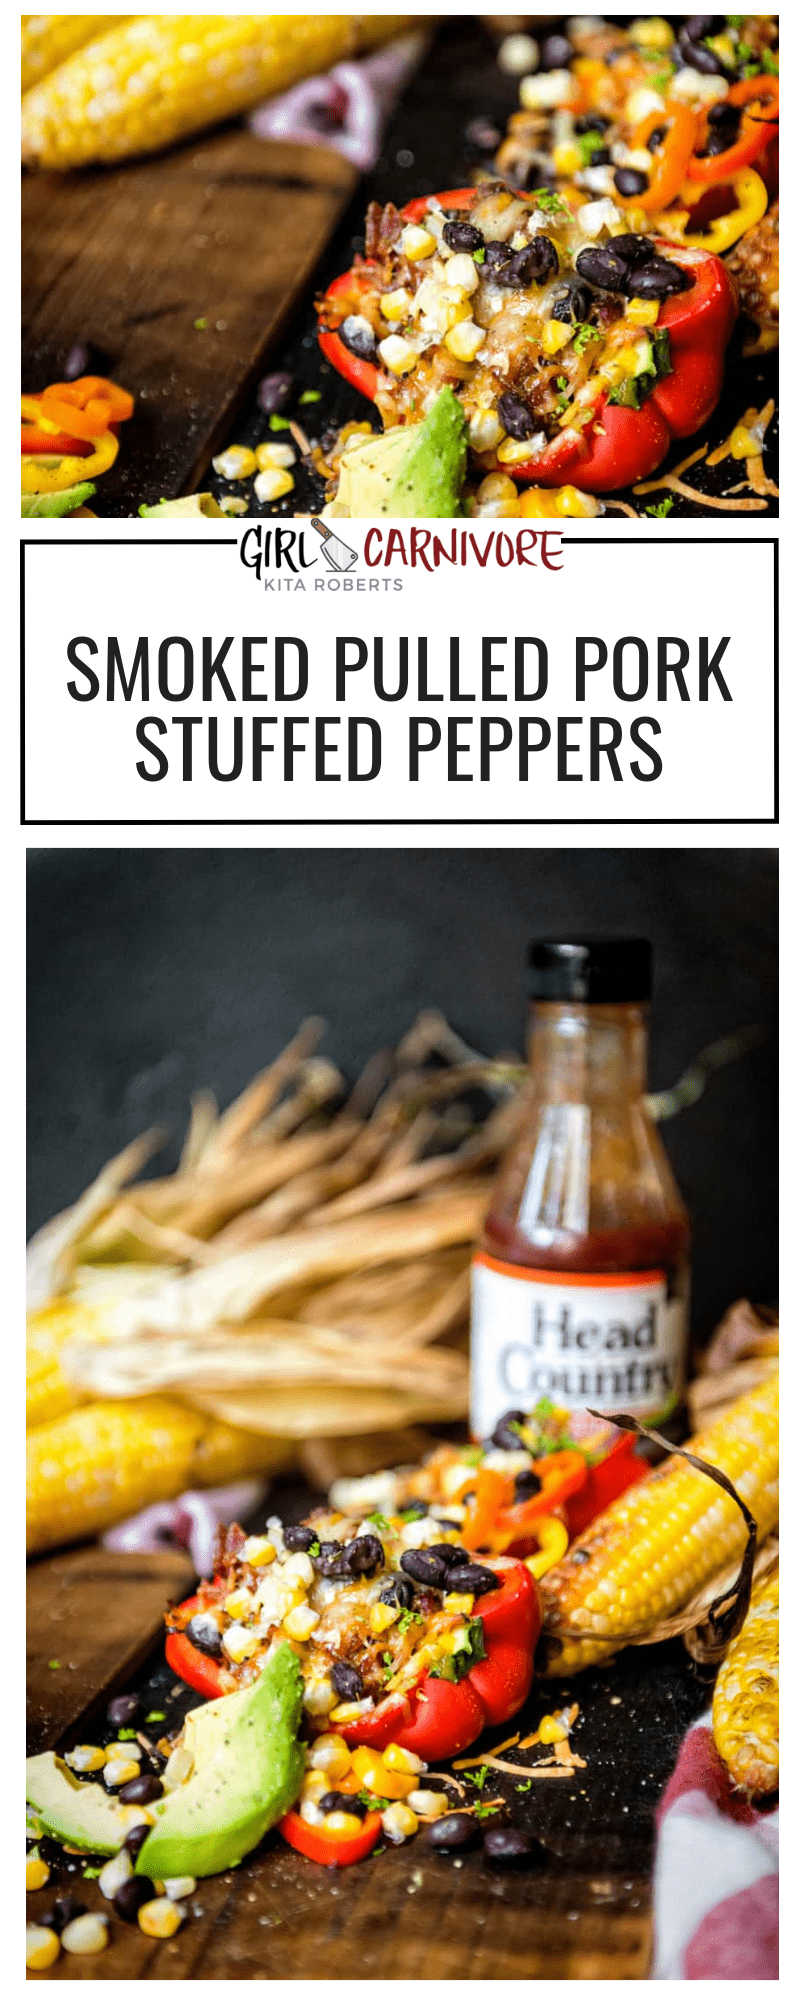 Elevate traditional stuffed peppers by turning them into smoked barbecue goodness and make new fans out of a classic dish with these Smoked Pulled Pork Stuffed Peppers!